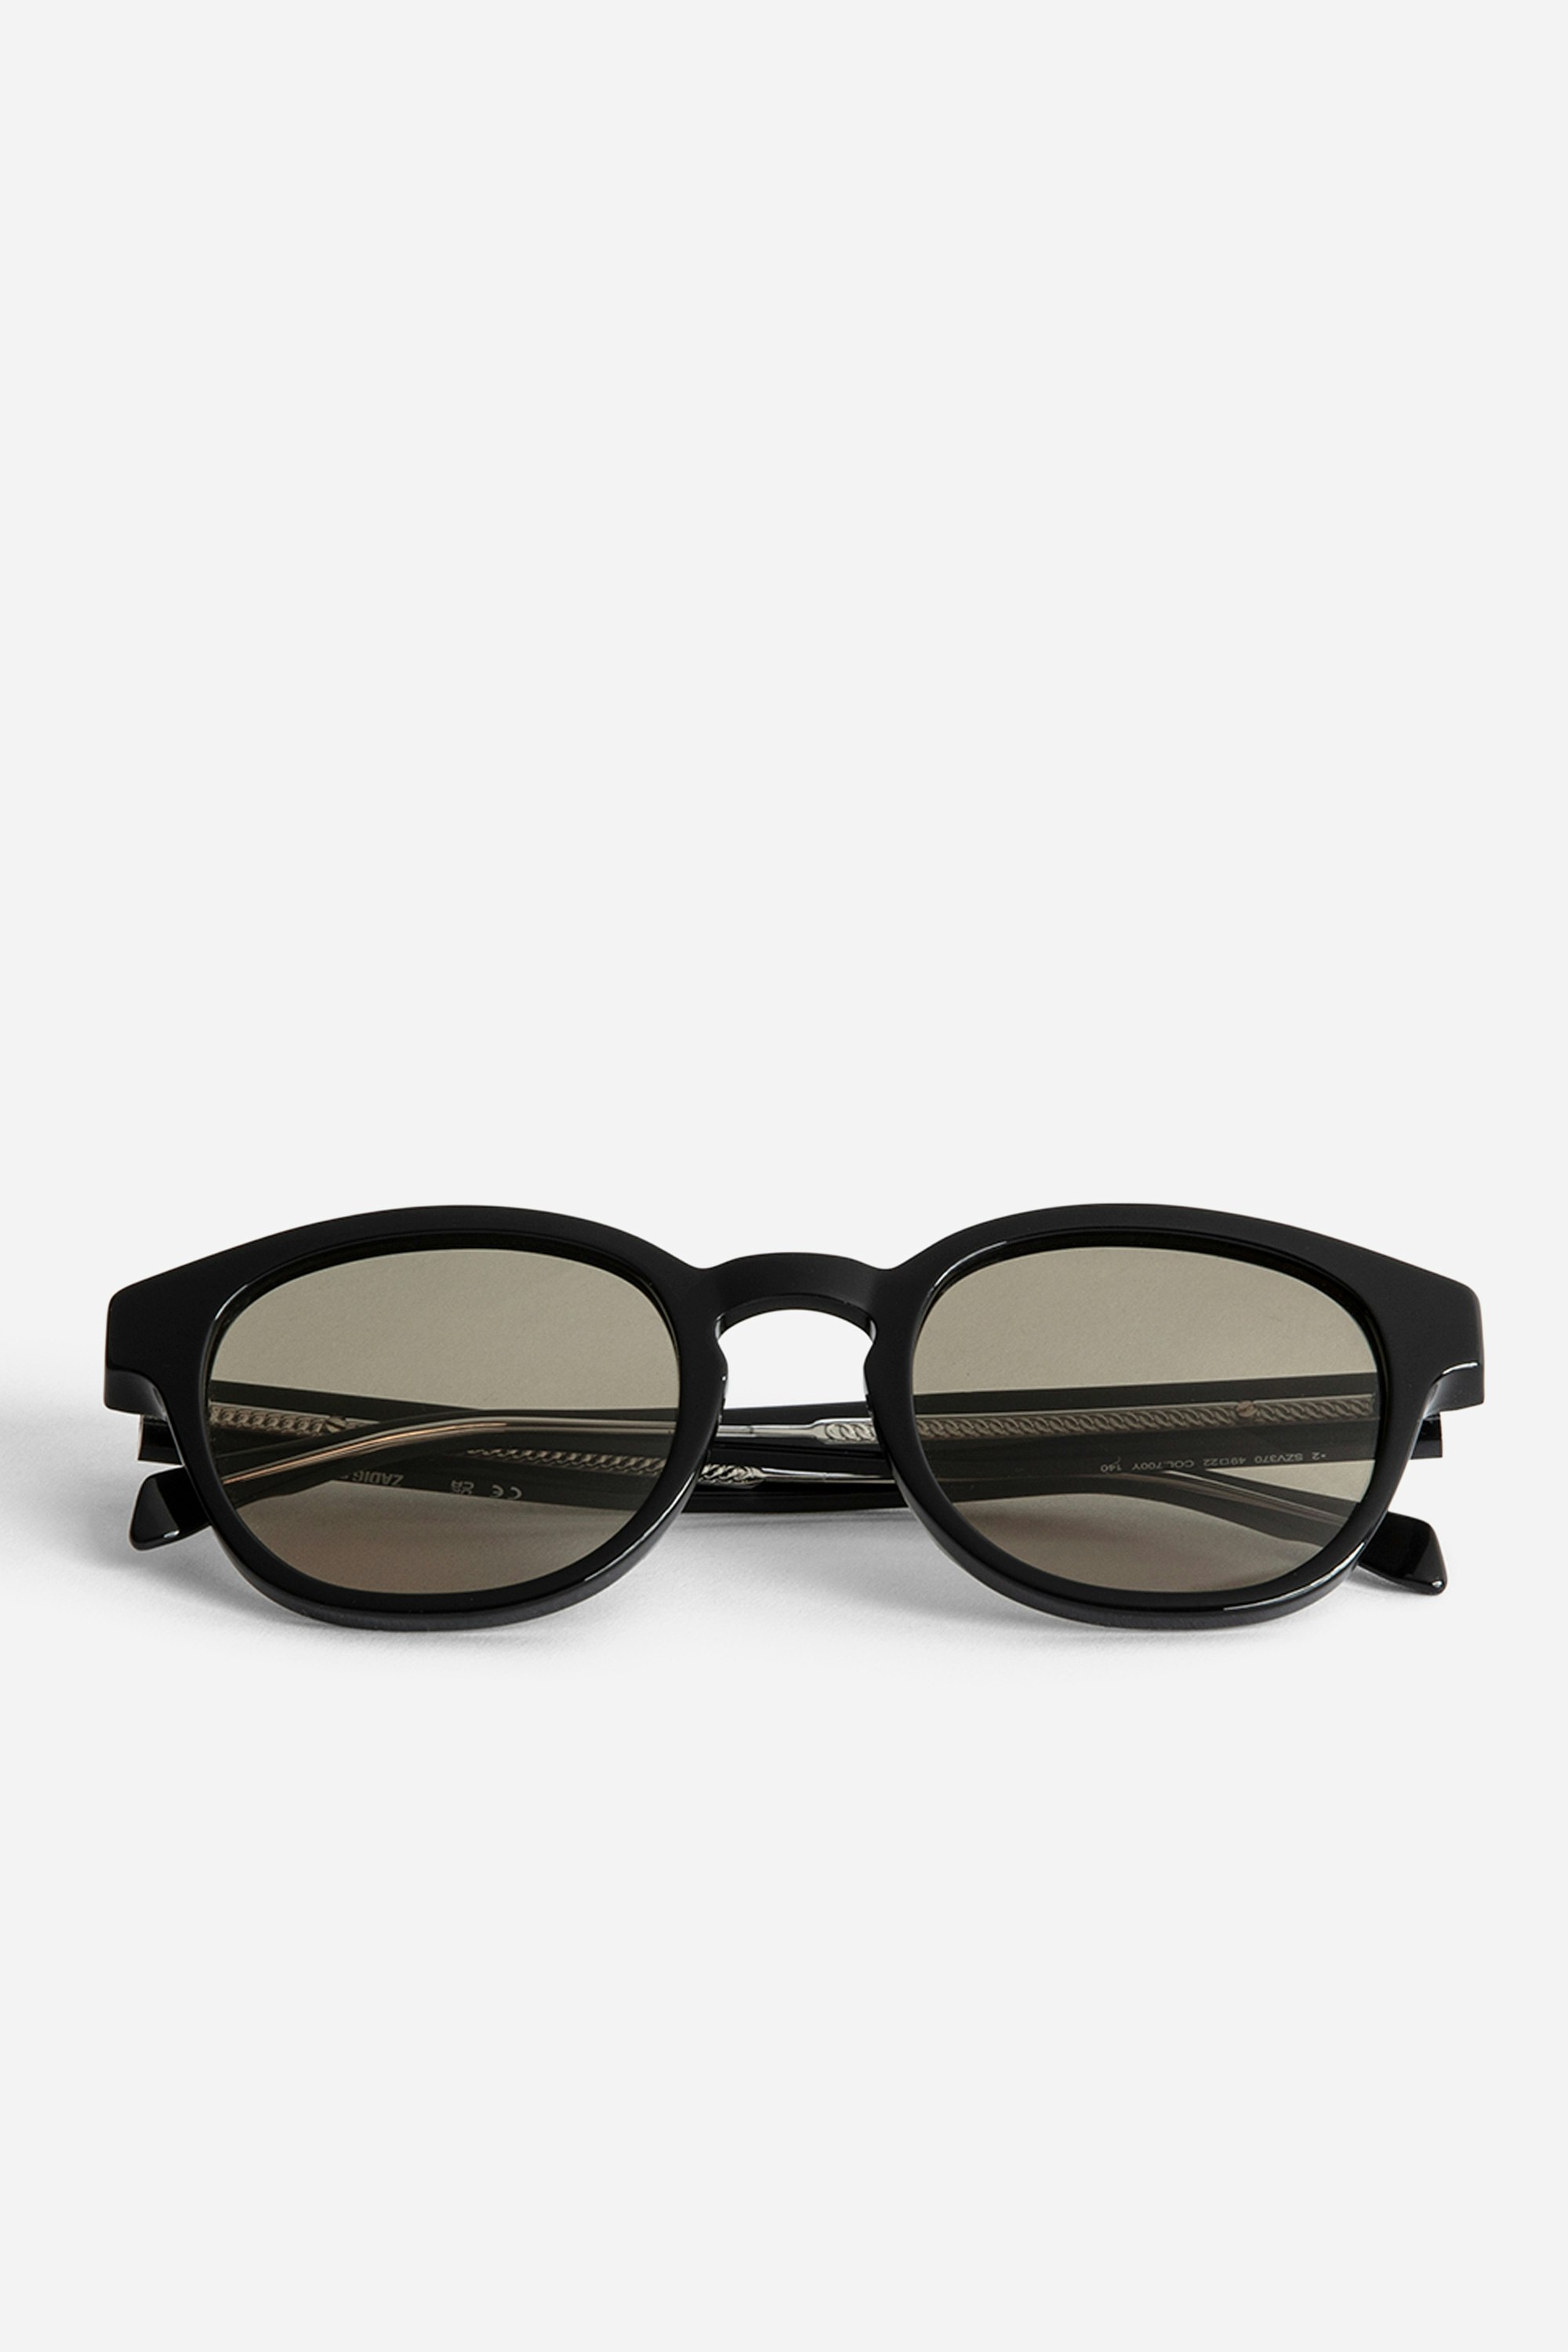 ZV23H6 Sunglasses - Unisex rounded sunglasses with wings on the temples.